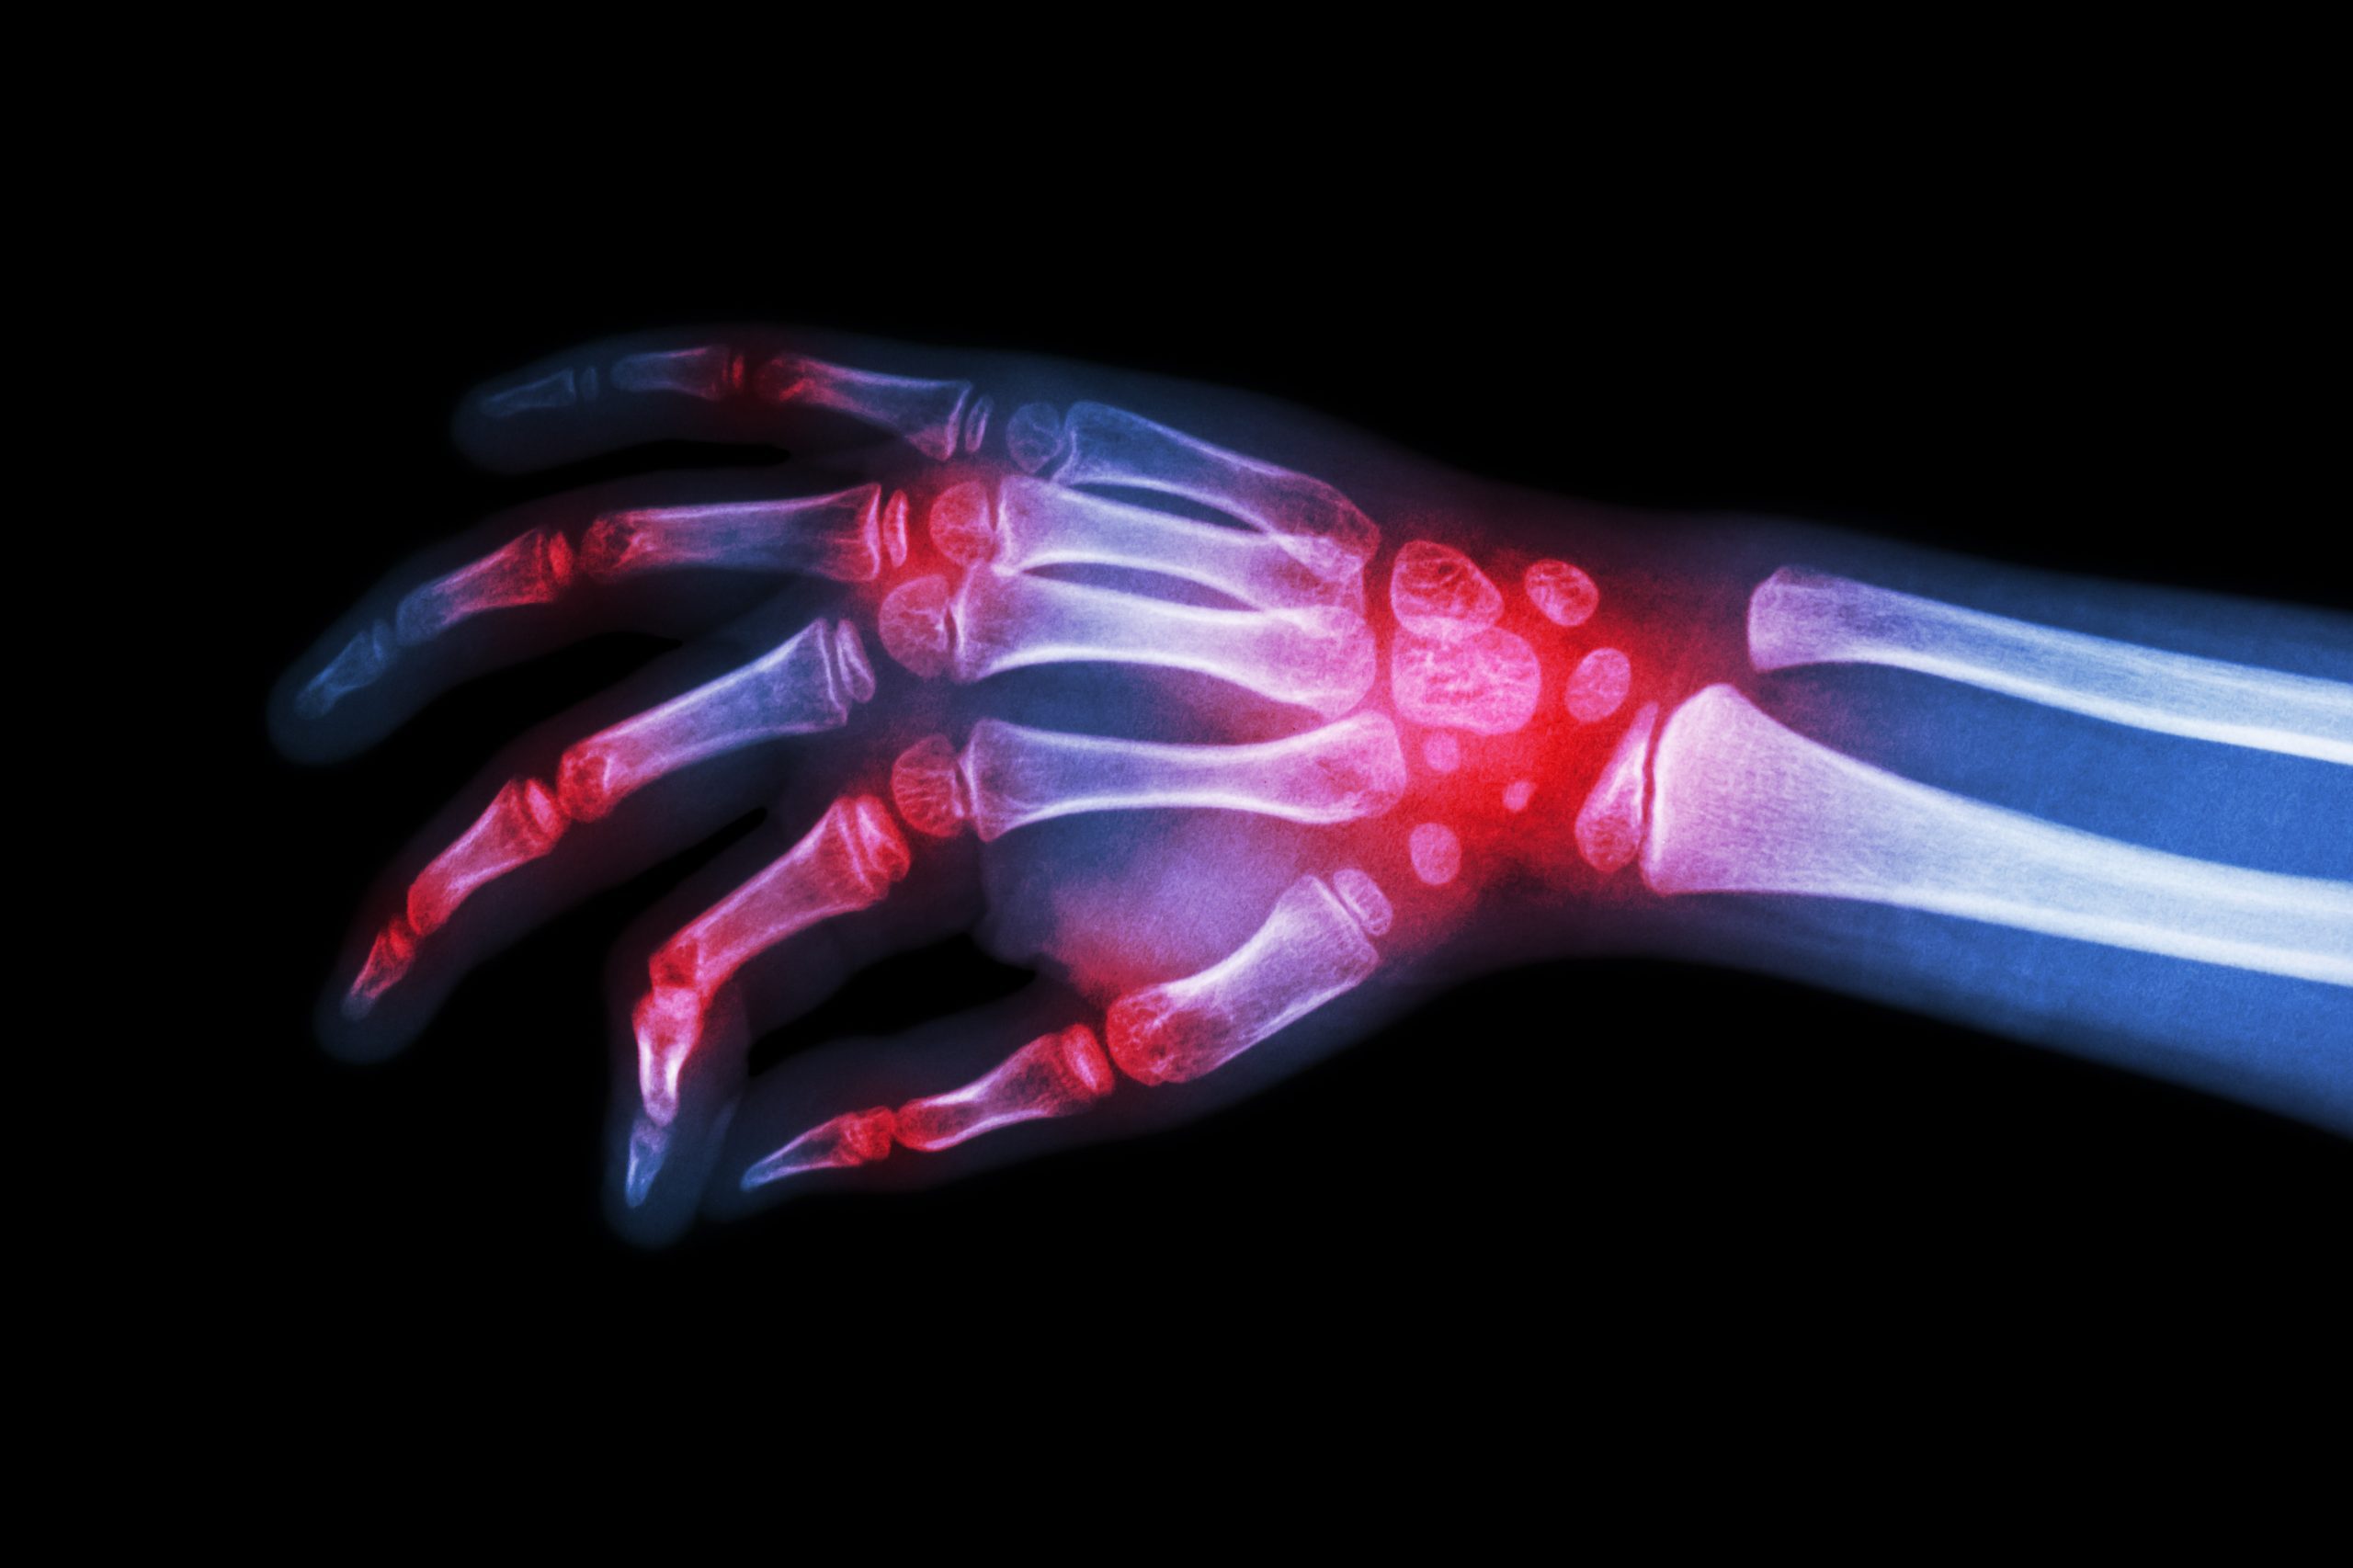 X-ray image showing damage to the wrist and multiple finger joints.